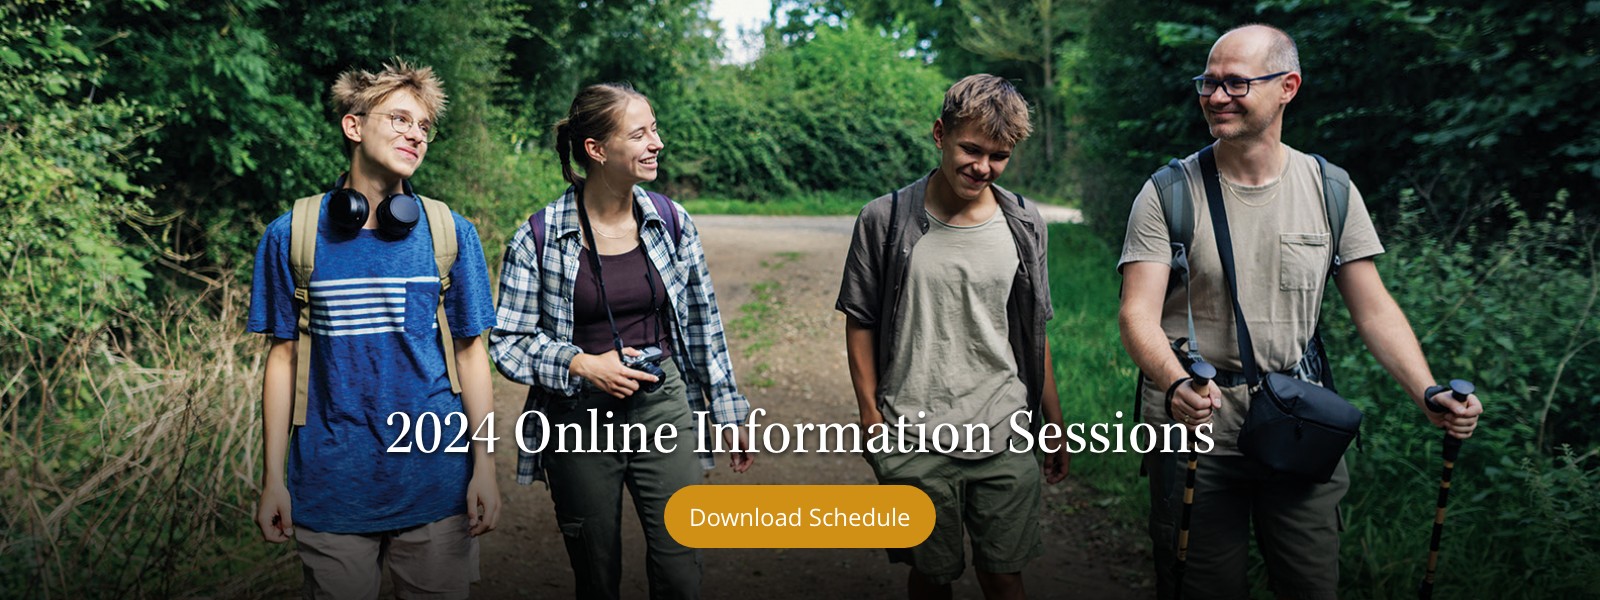 Diakon adoption and foster care online info sessions schedule image